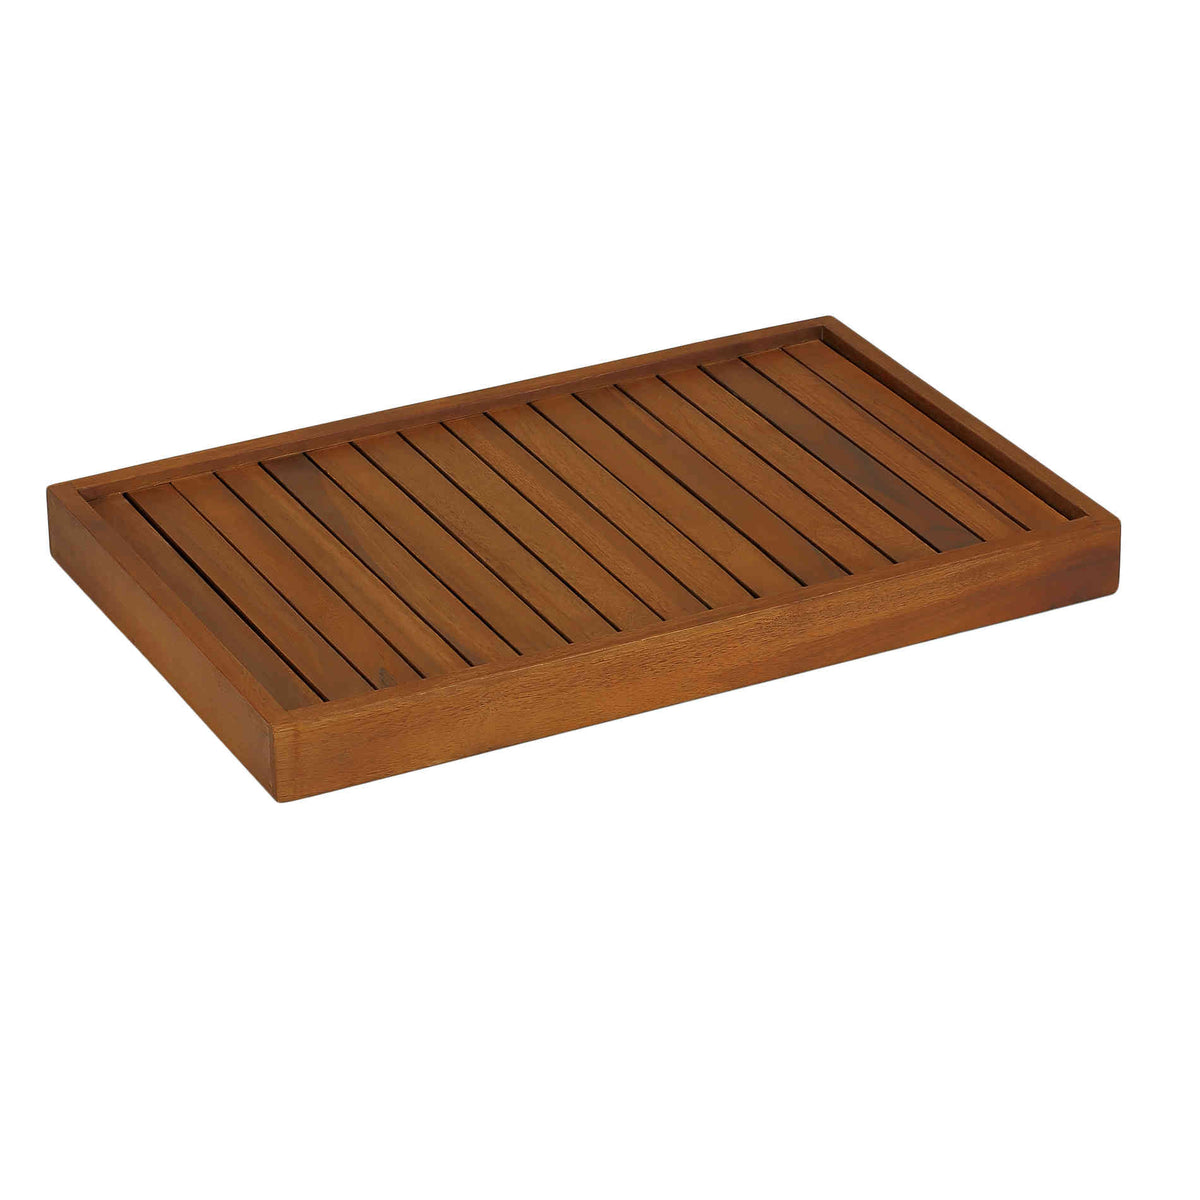 Bare Decor Coco Bed Tray Table in Solid Teak Wood